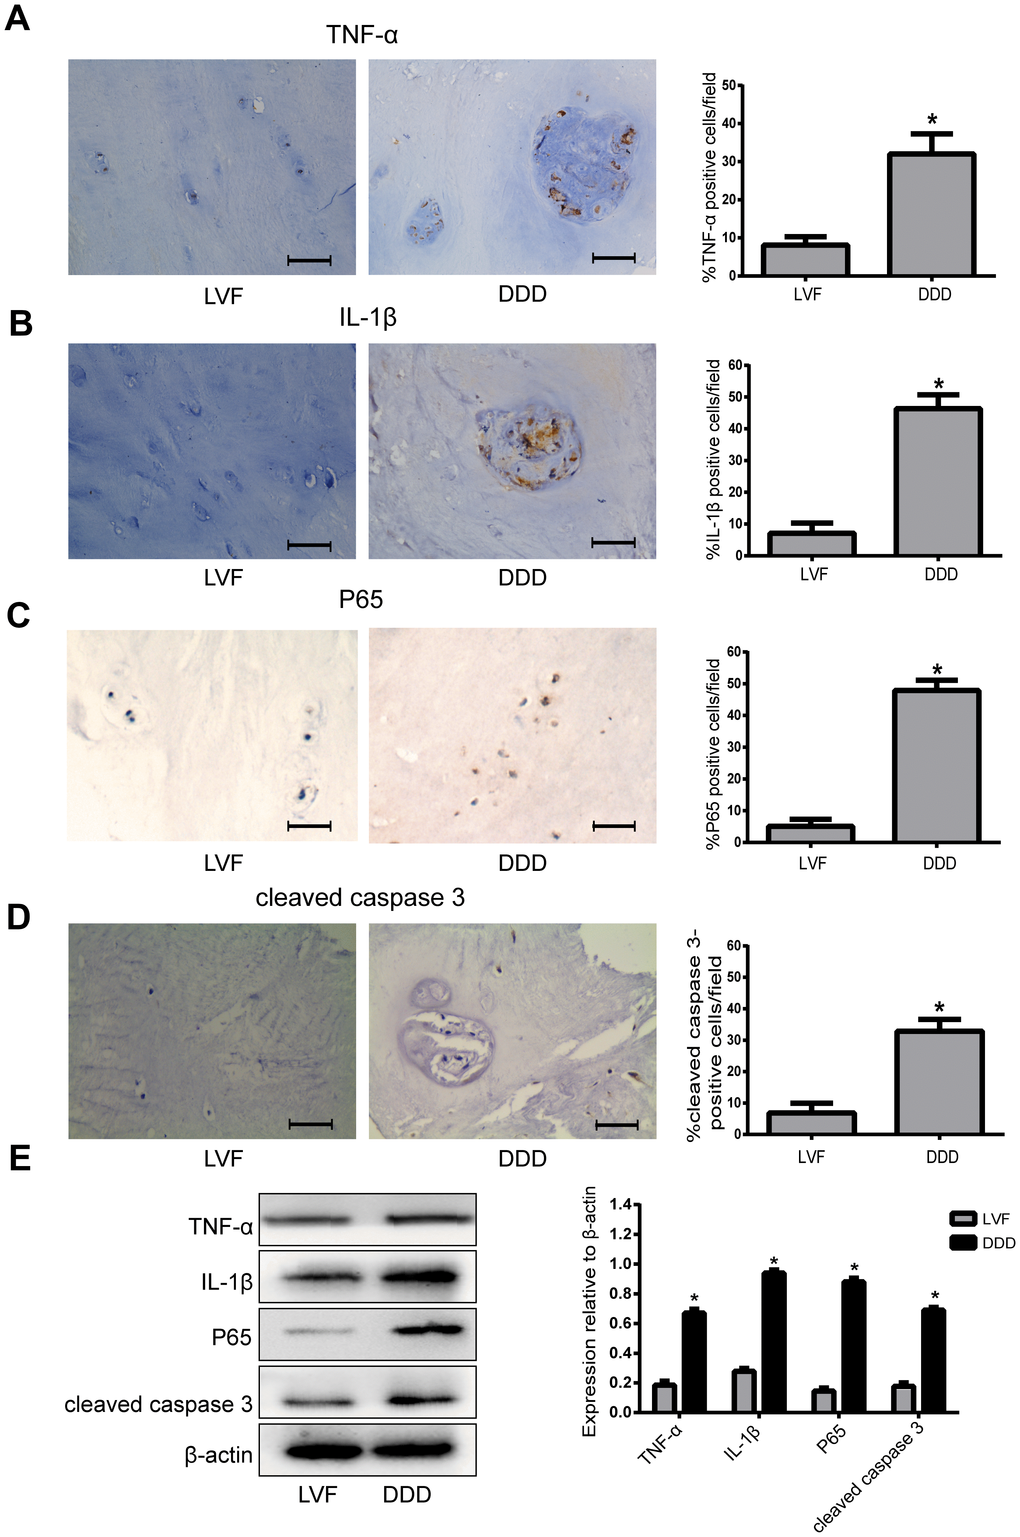 The expression of TNF-α, IL-1β, P65 and cleaved caspase 3 in human NP tissues from LVF and DDD group. (A), (B), (C) and (D) Immunohistochemistry results show that the levels of TNF-α (A), IL-1β (B), P65 (C) and cleaved caspase-3 (D) were significantly increased in NP tissues from patients with DDD (magnification ×400); (E) Western blot for the protein level of TNF-α, IL-1β, P65 and cleaved caspase 3. Values are means ±SEM.*p